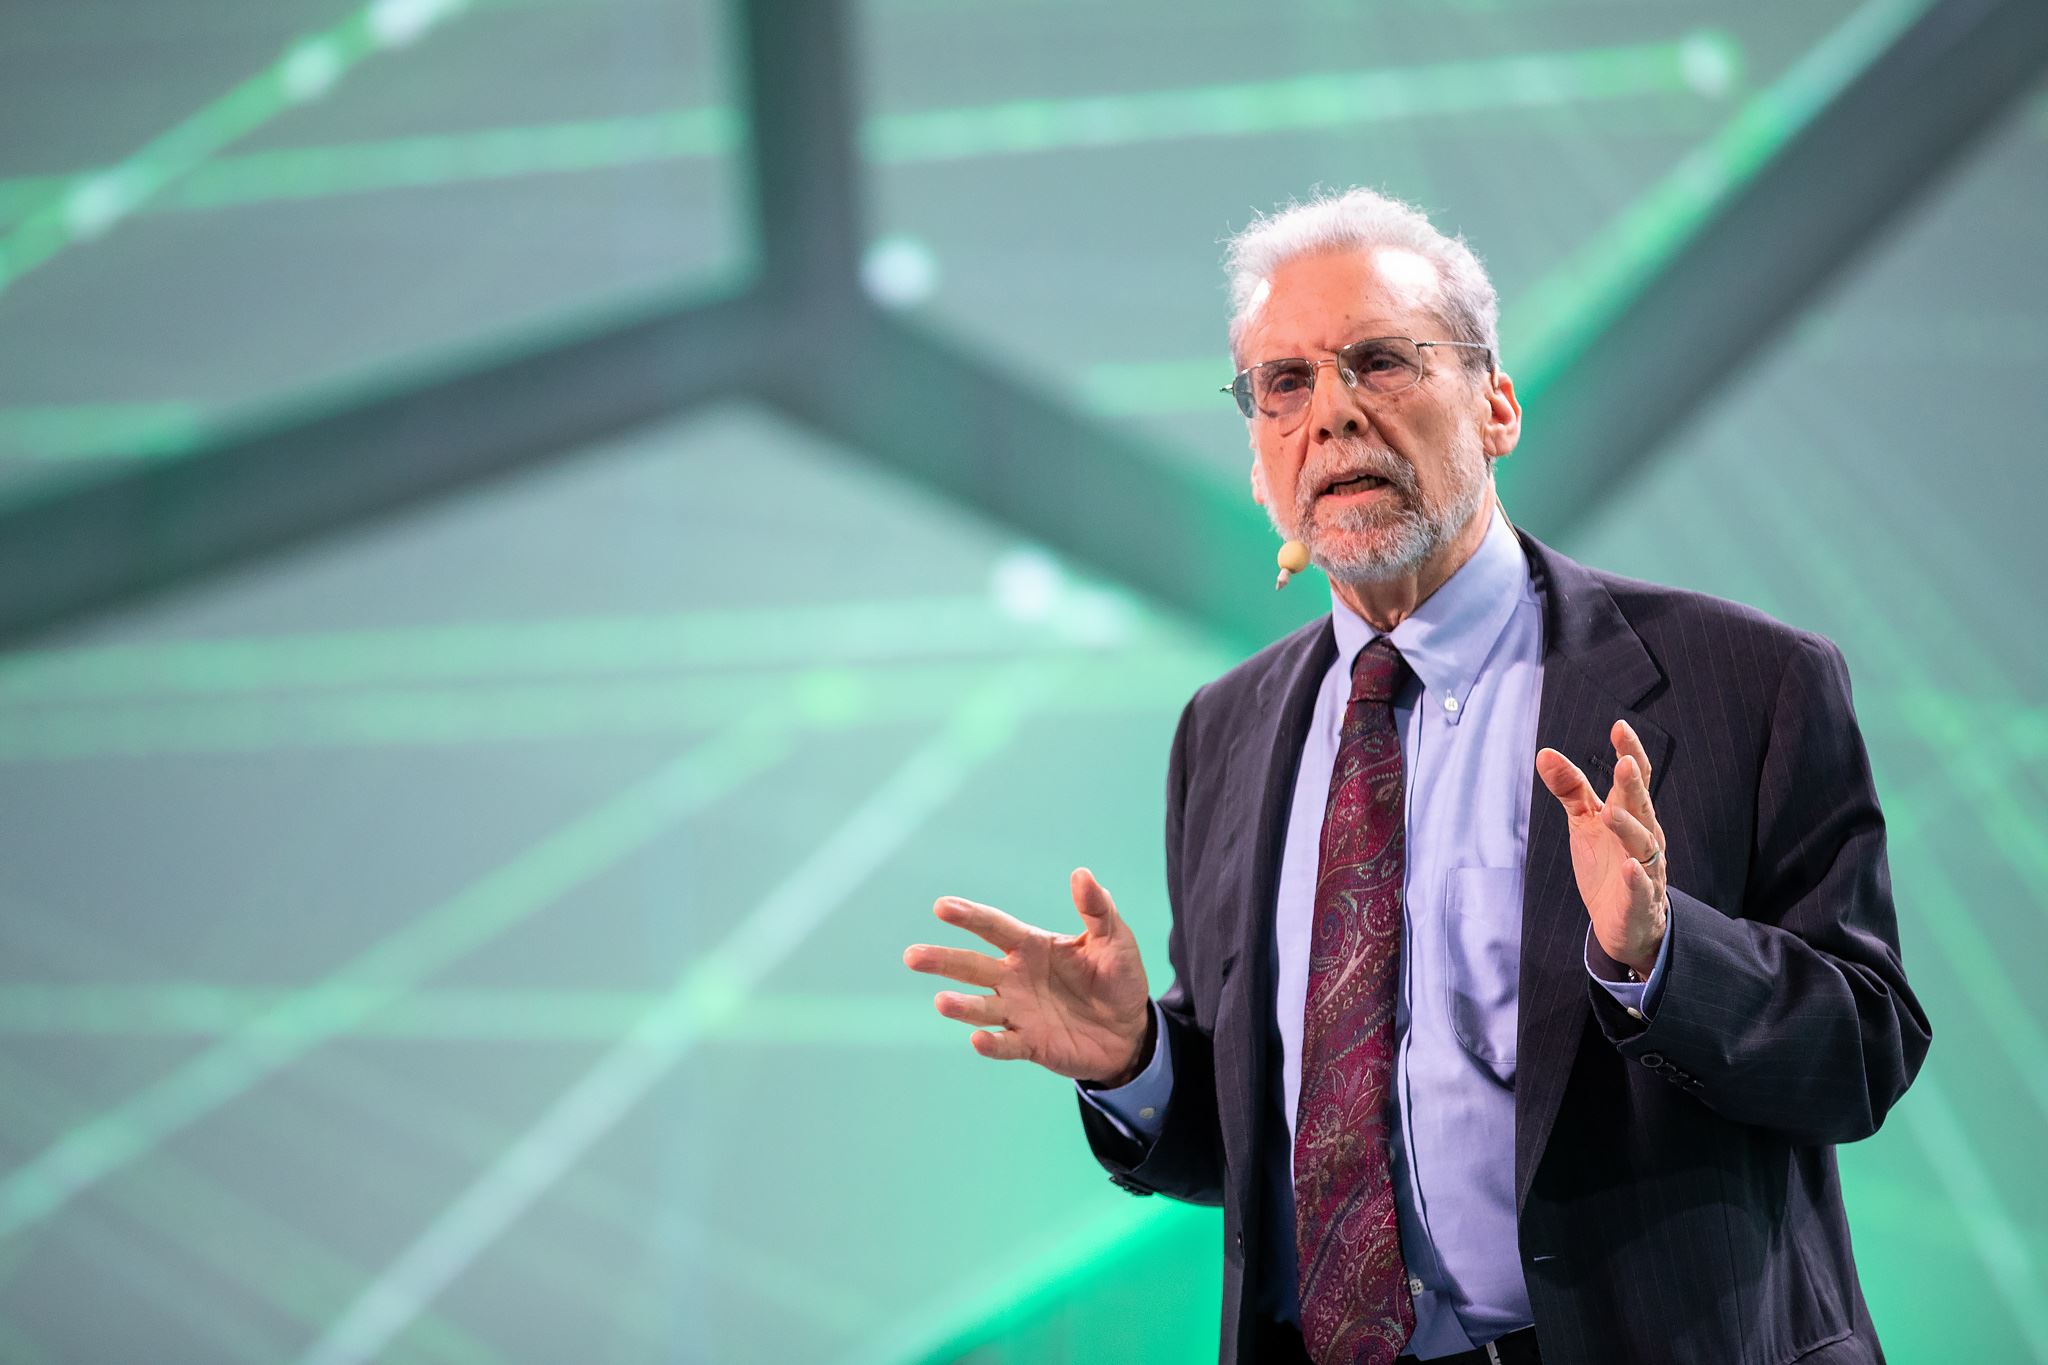 6 things you might not know about Daniel Goleman